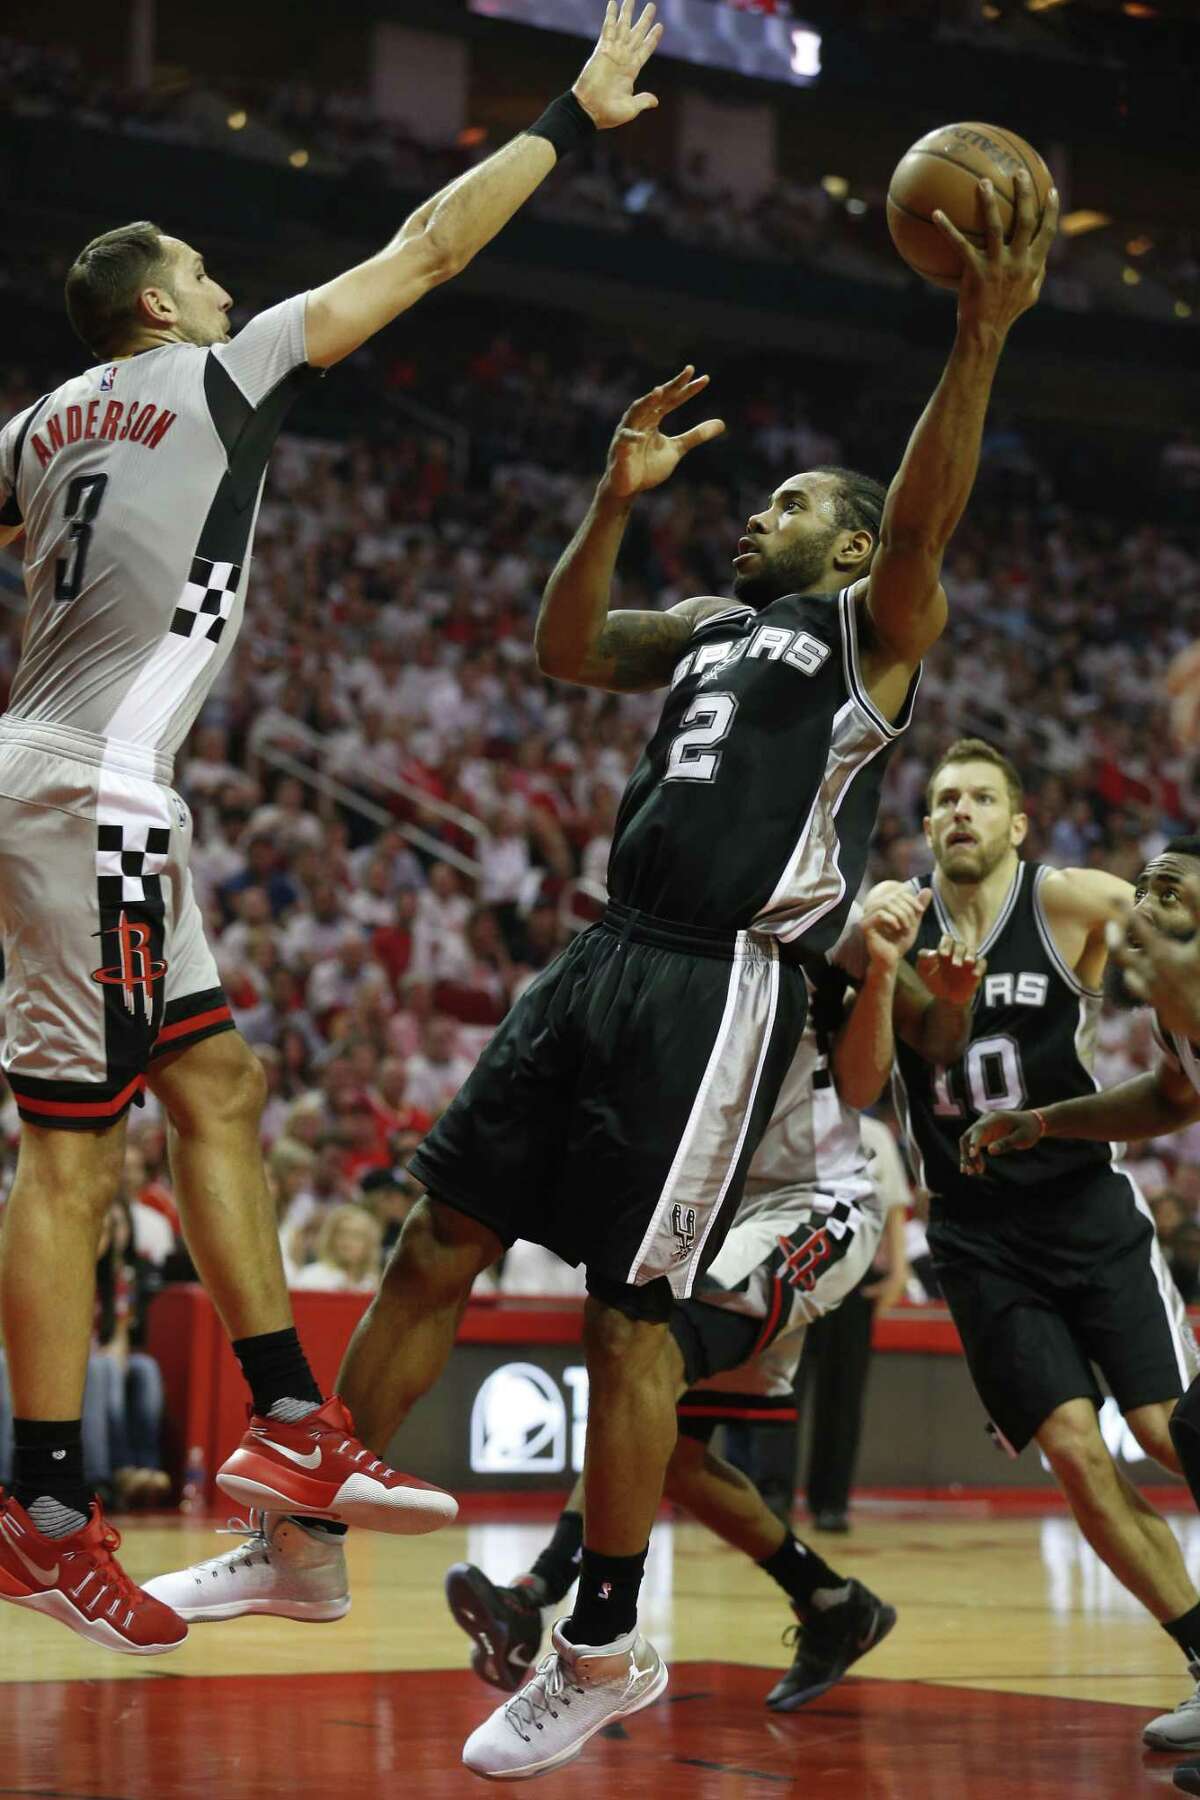 Spurs’ Kawhi Leonard shoots against the Rockets’ Ryan Anderson in Game 4 at the Toyota Center on May 7, 2017.